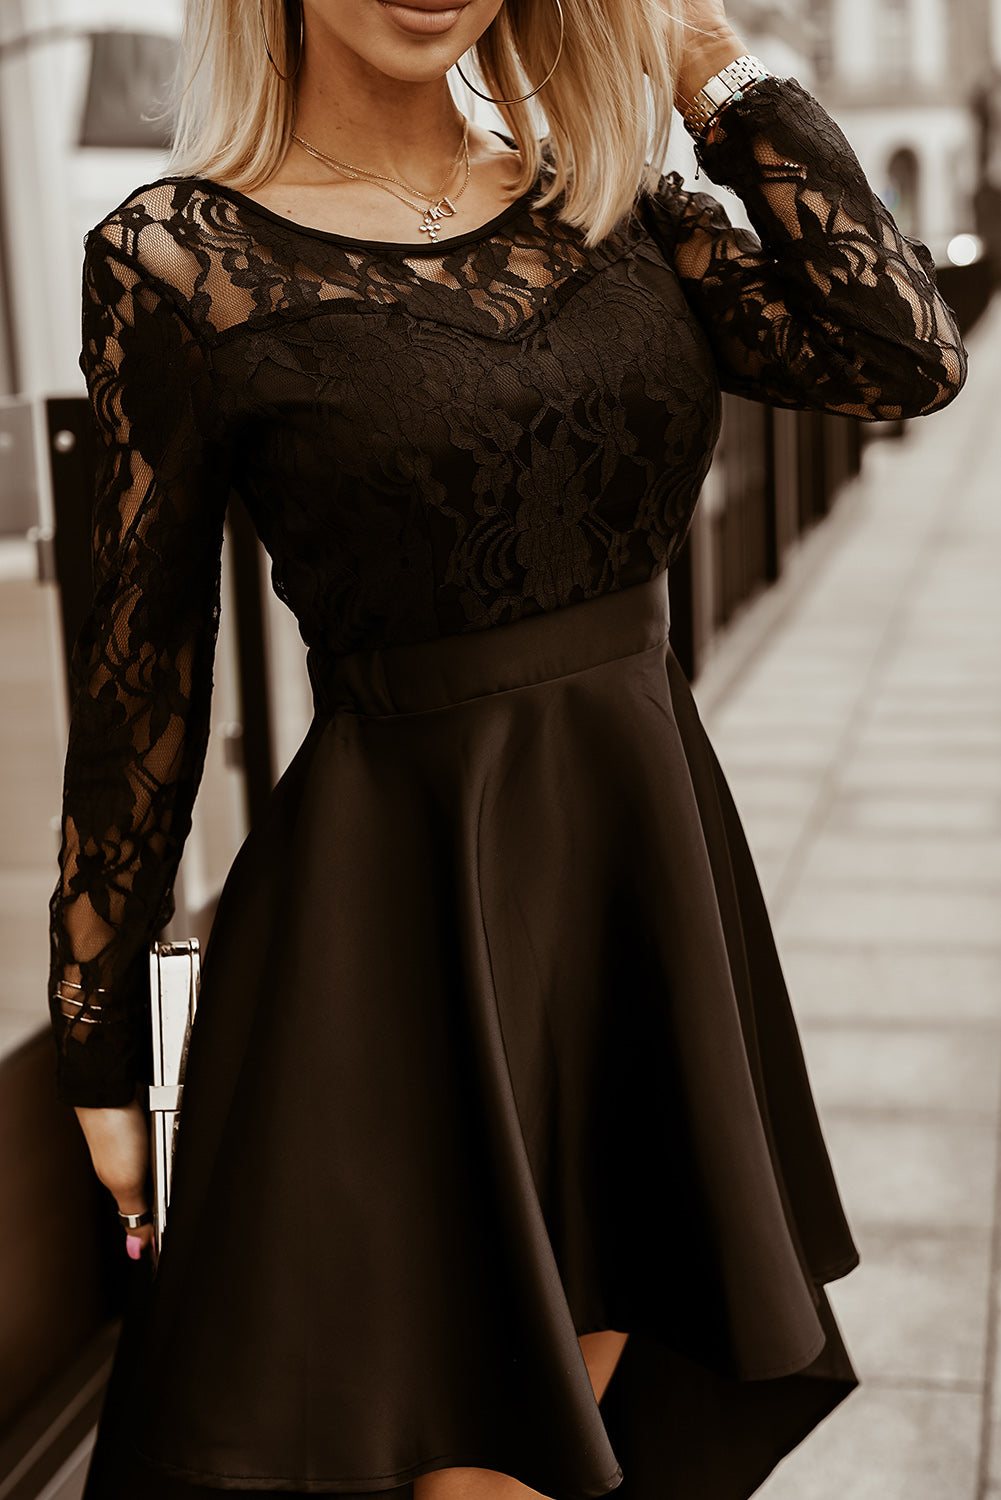 Black Long Sleeve Lace High Low Satin Prom Dress